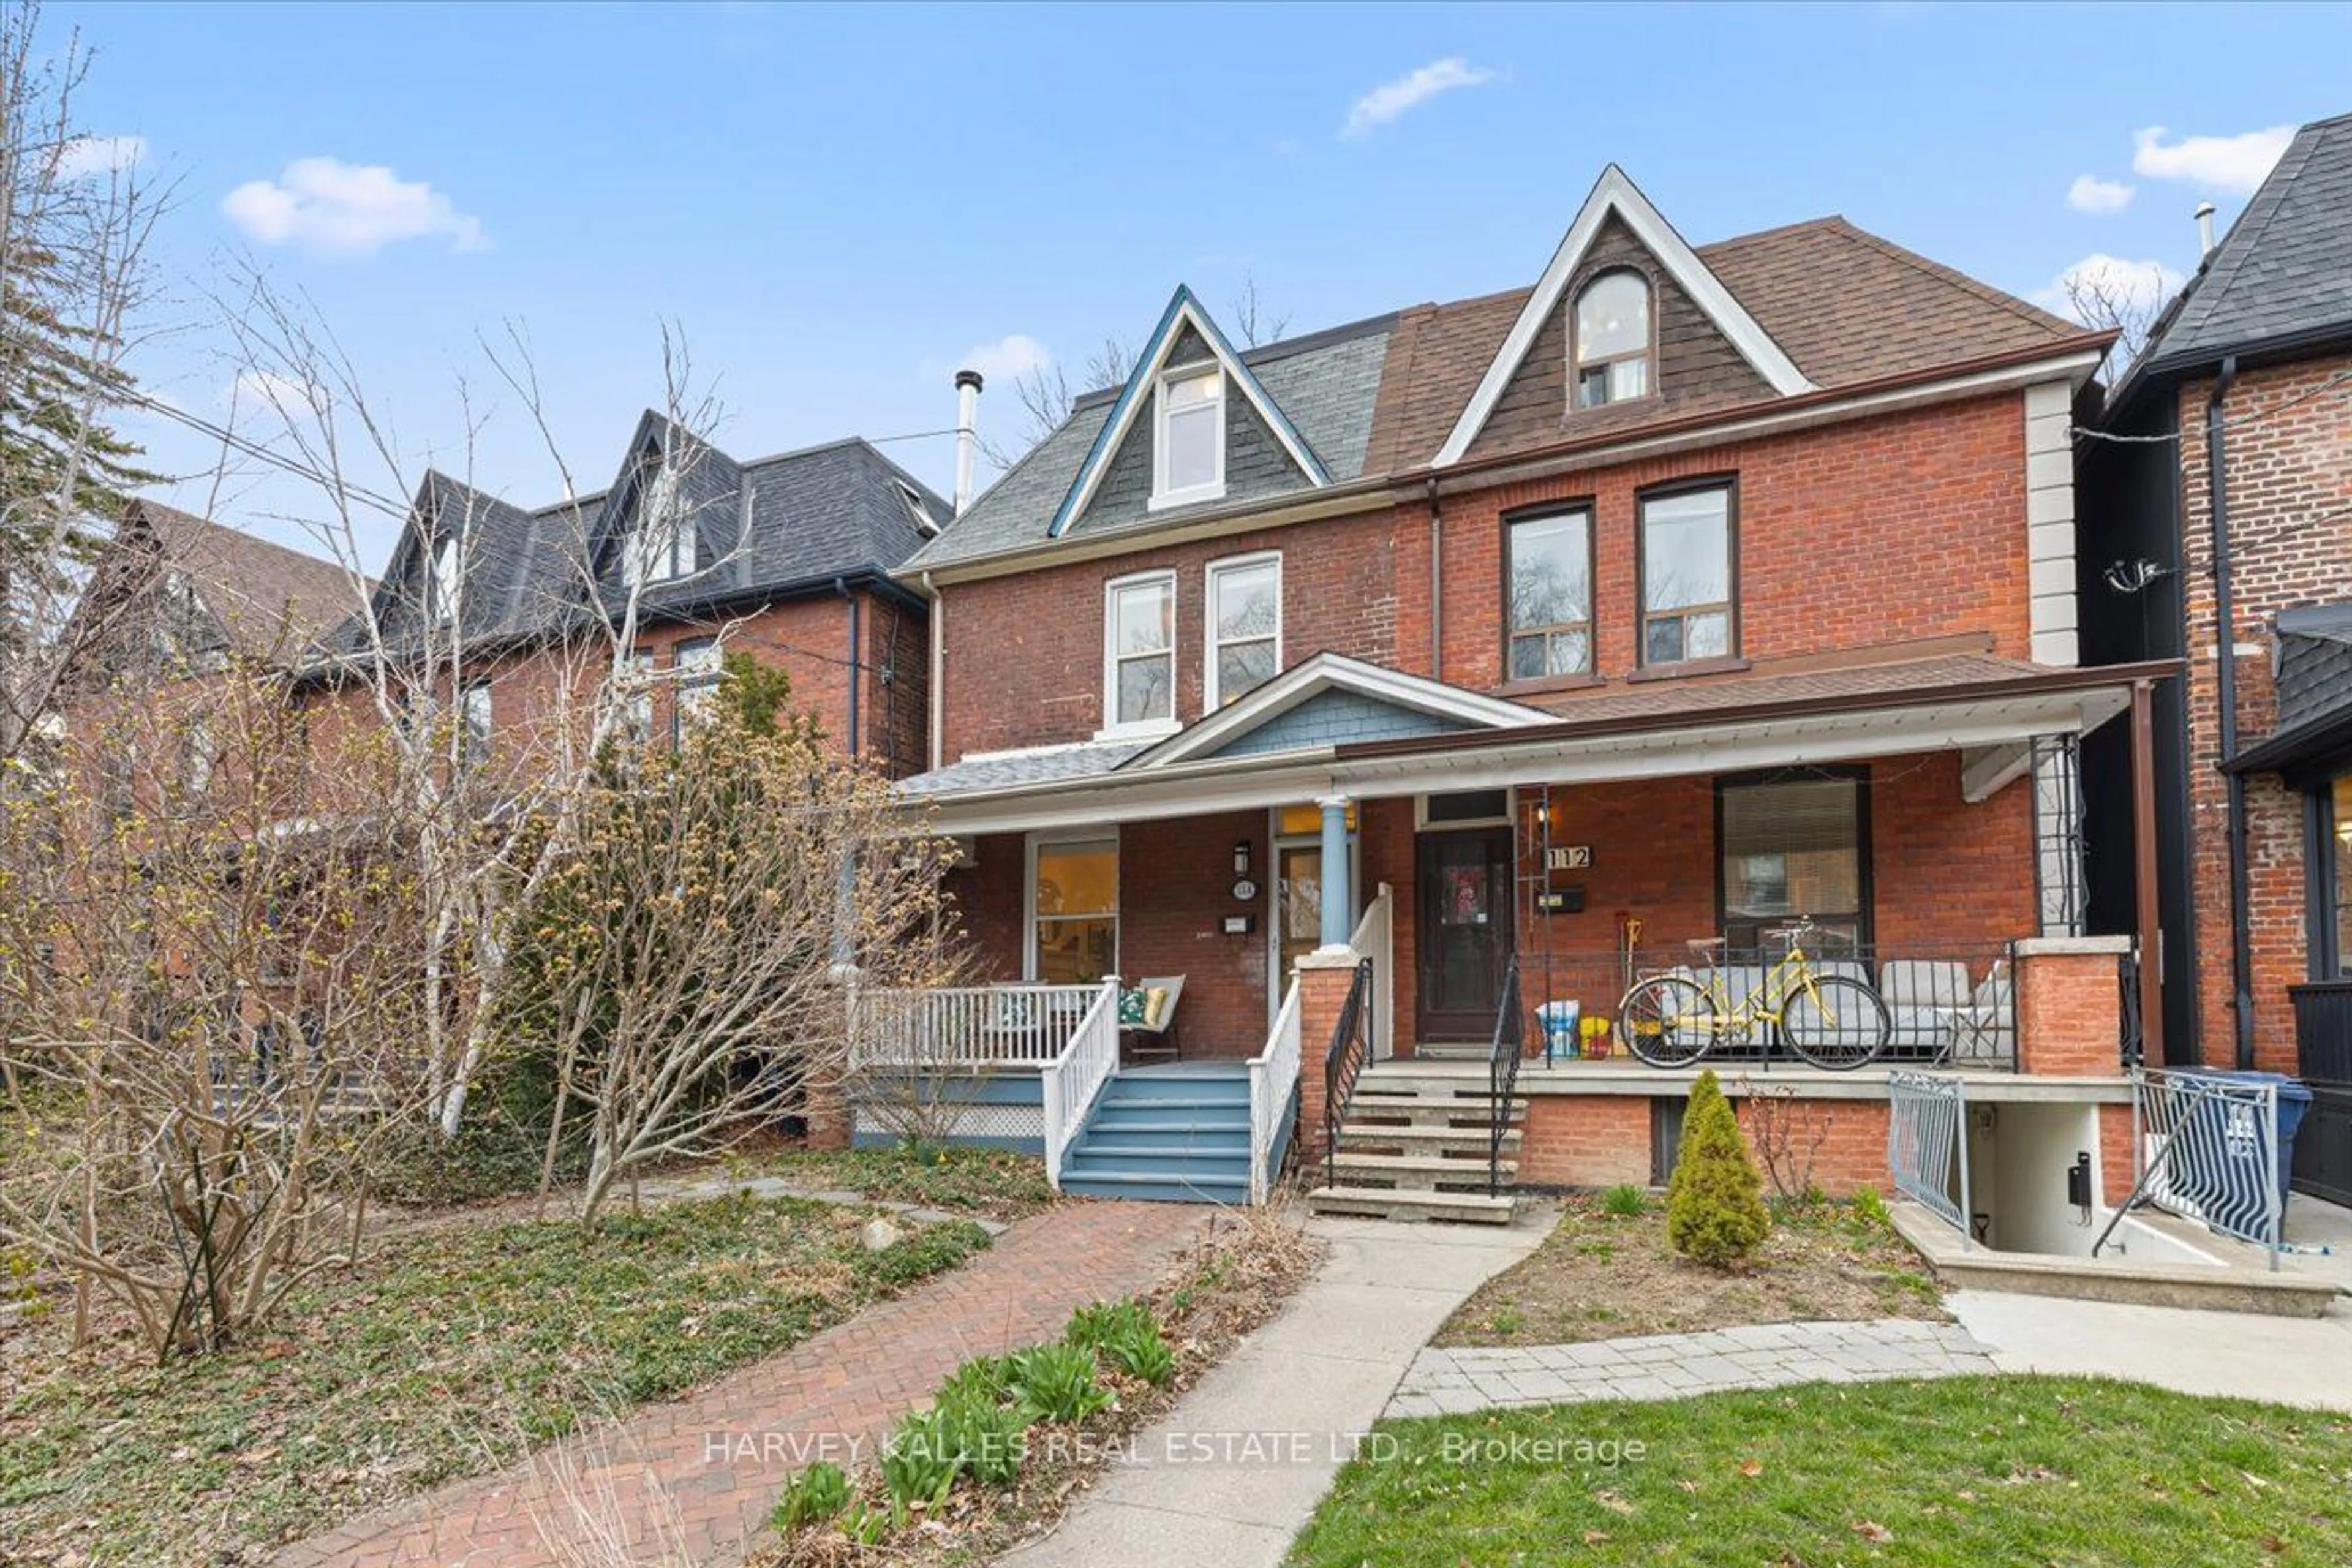 Home with brick exterior material for 114 Wells St, Toronto Ontario M5R 1P3